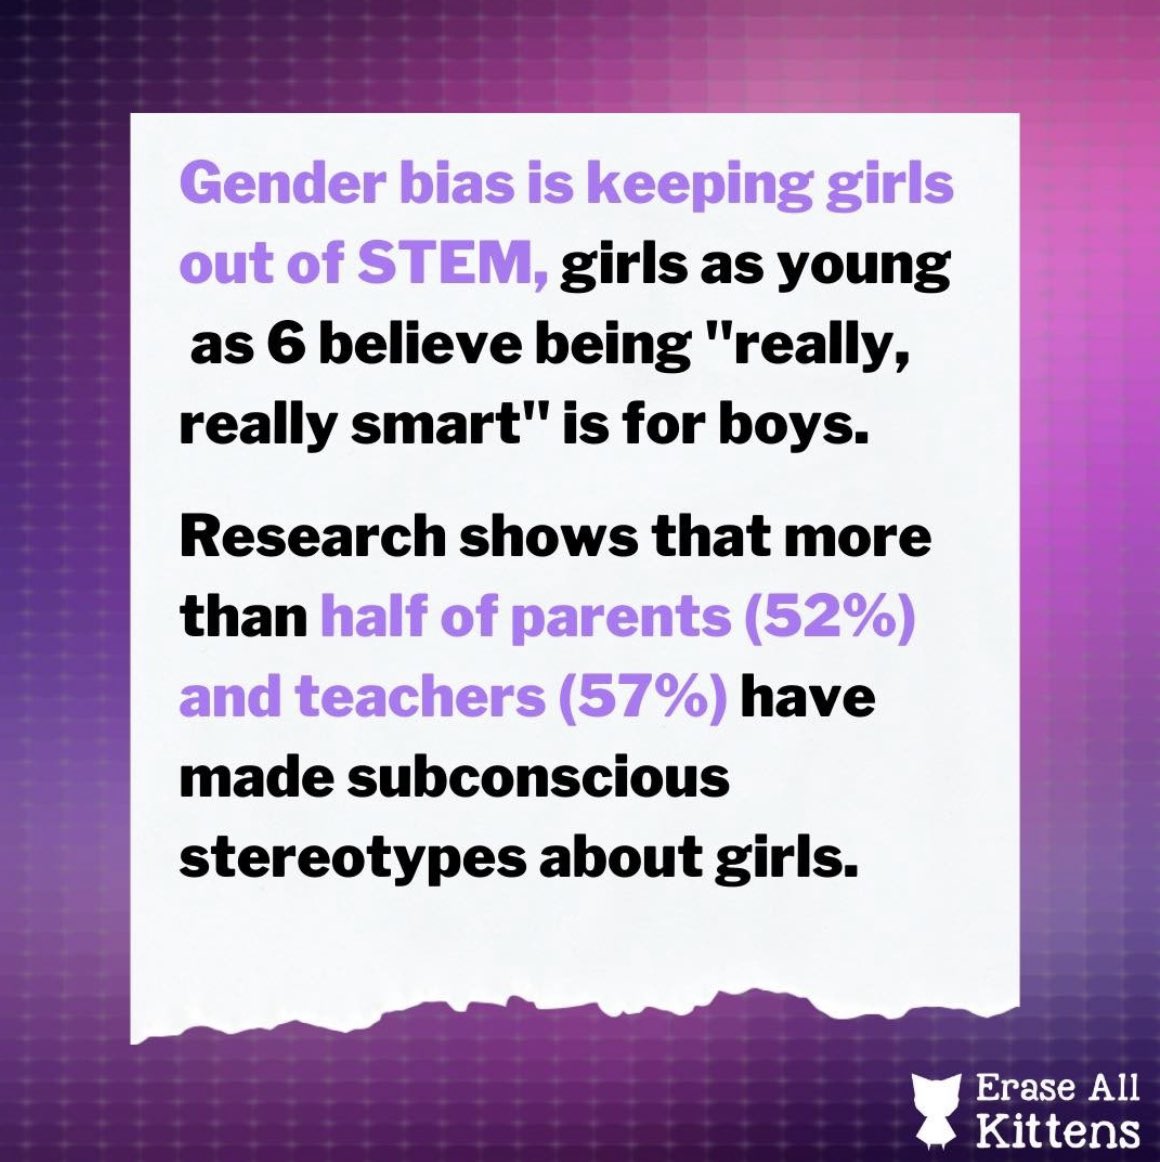 It’s International #GirlsinICT day! Education for young girls is often ignored - especially in computing with most tools being built by men. We need to do more to inspire girls from an early age - using fun gameplay, storytelling, creative coding and female role models 👾